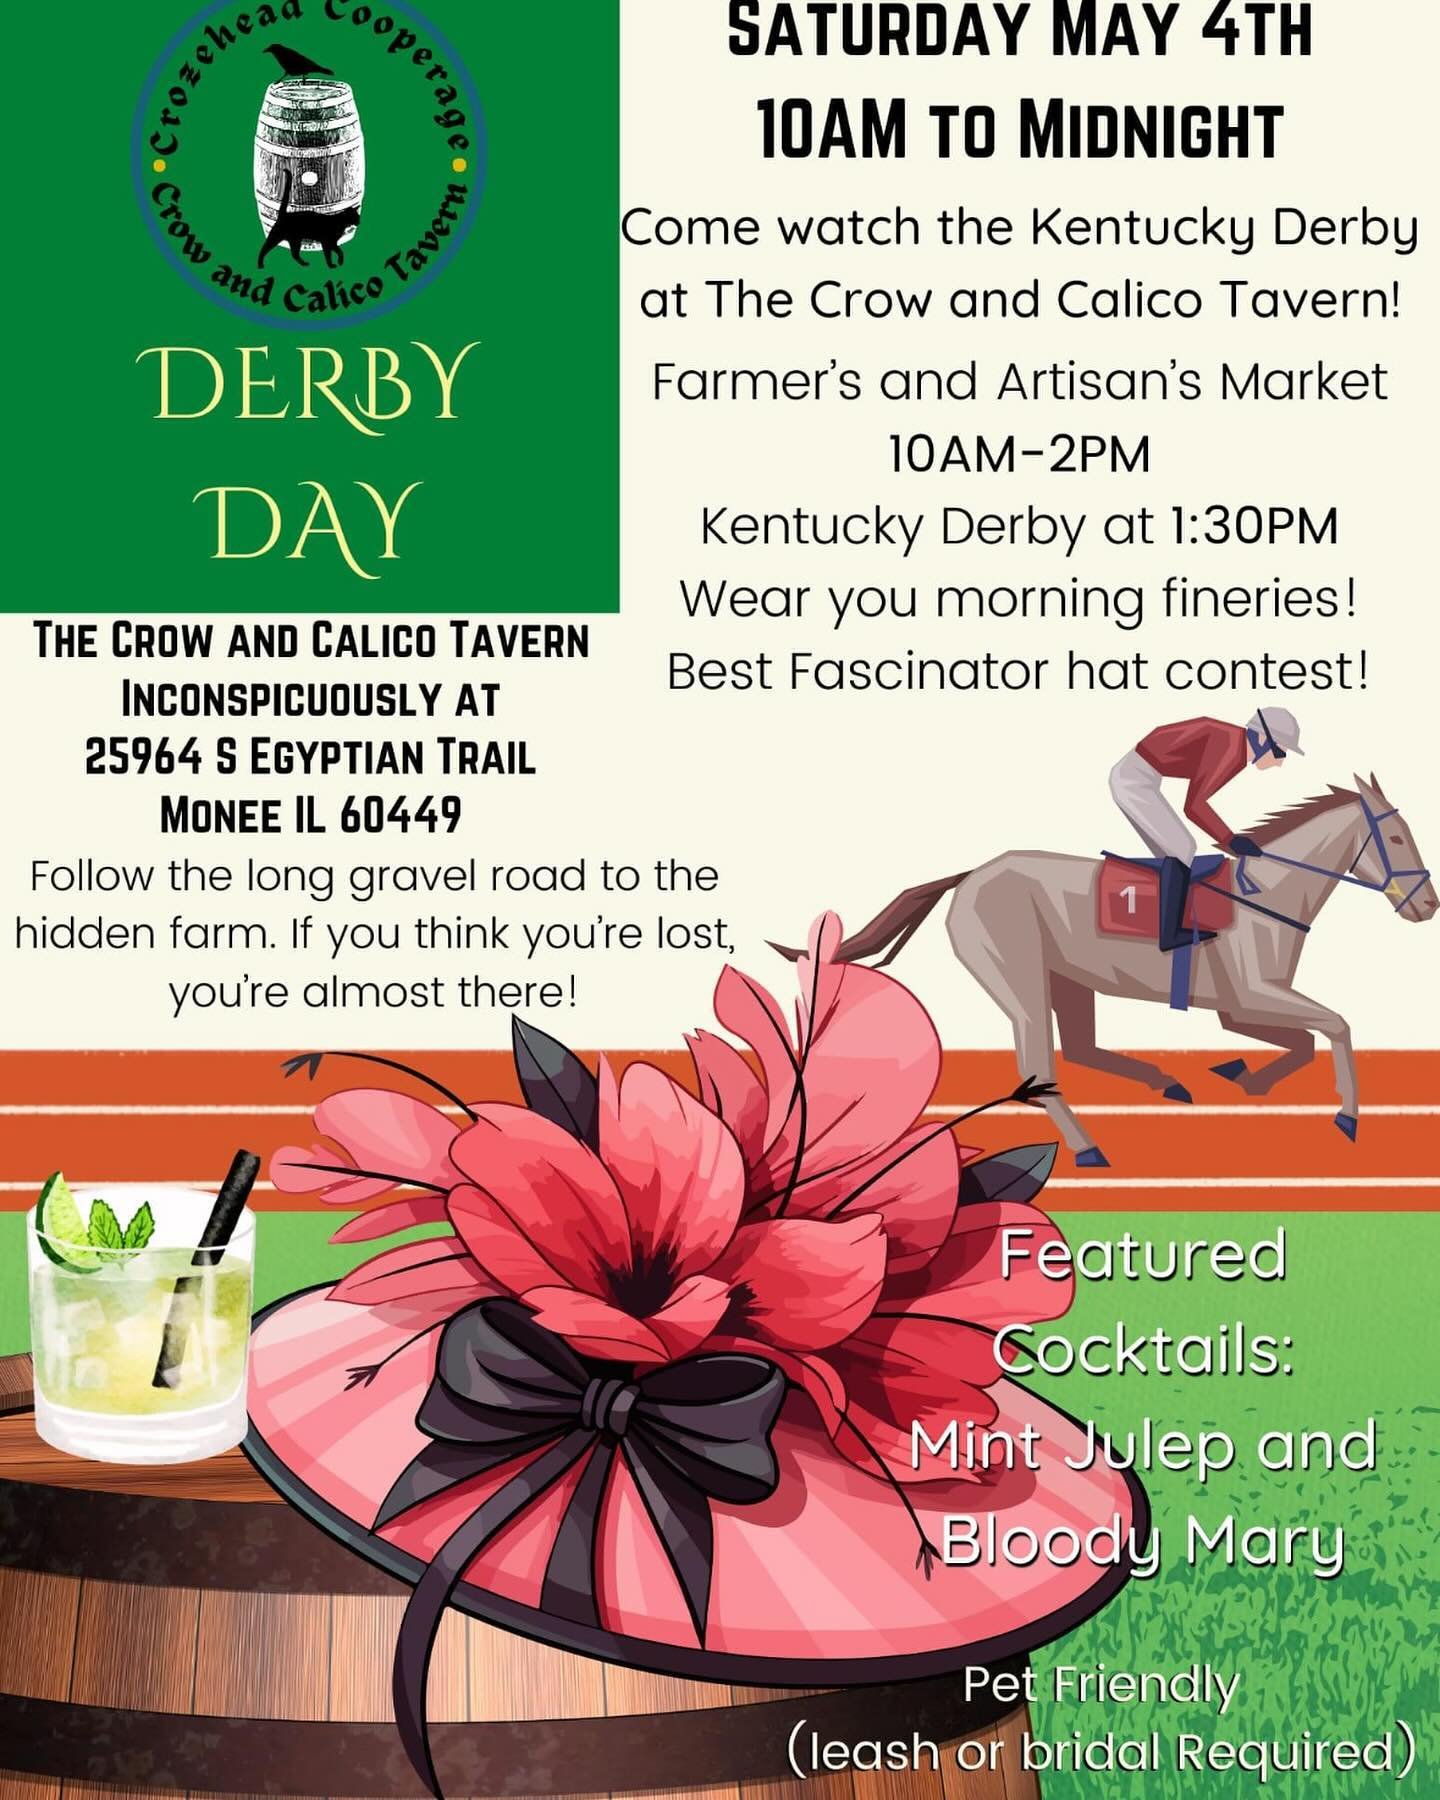 Catch us at the derby today! Or at least at the market/derby watch party 10am-2pm #farmersmarket #derbyday #sunshinefreshair #crowandcalicotavern #moneeIL eggs are available at the ranch for self serve